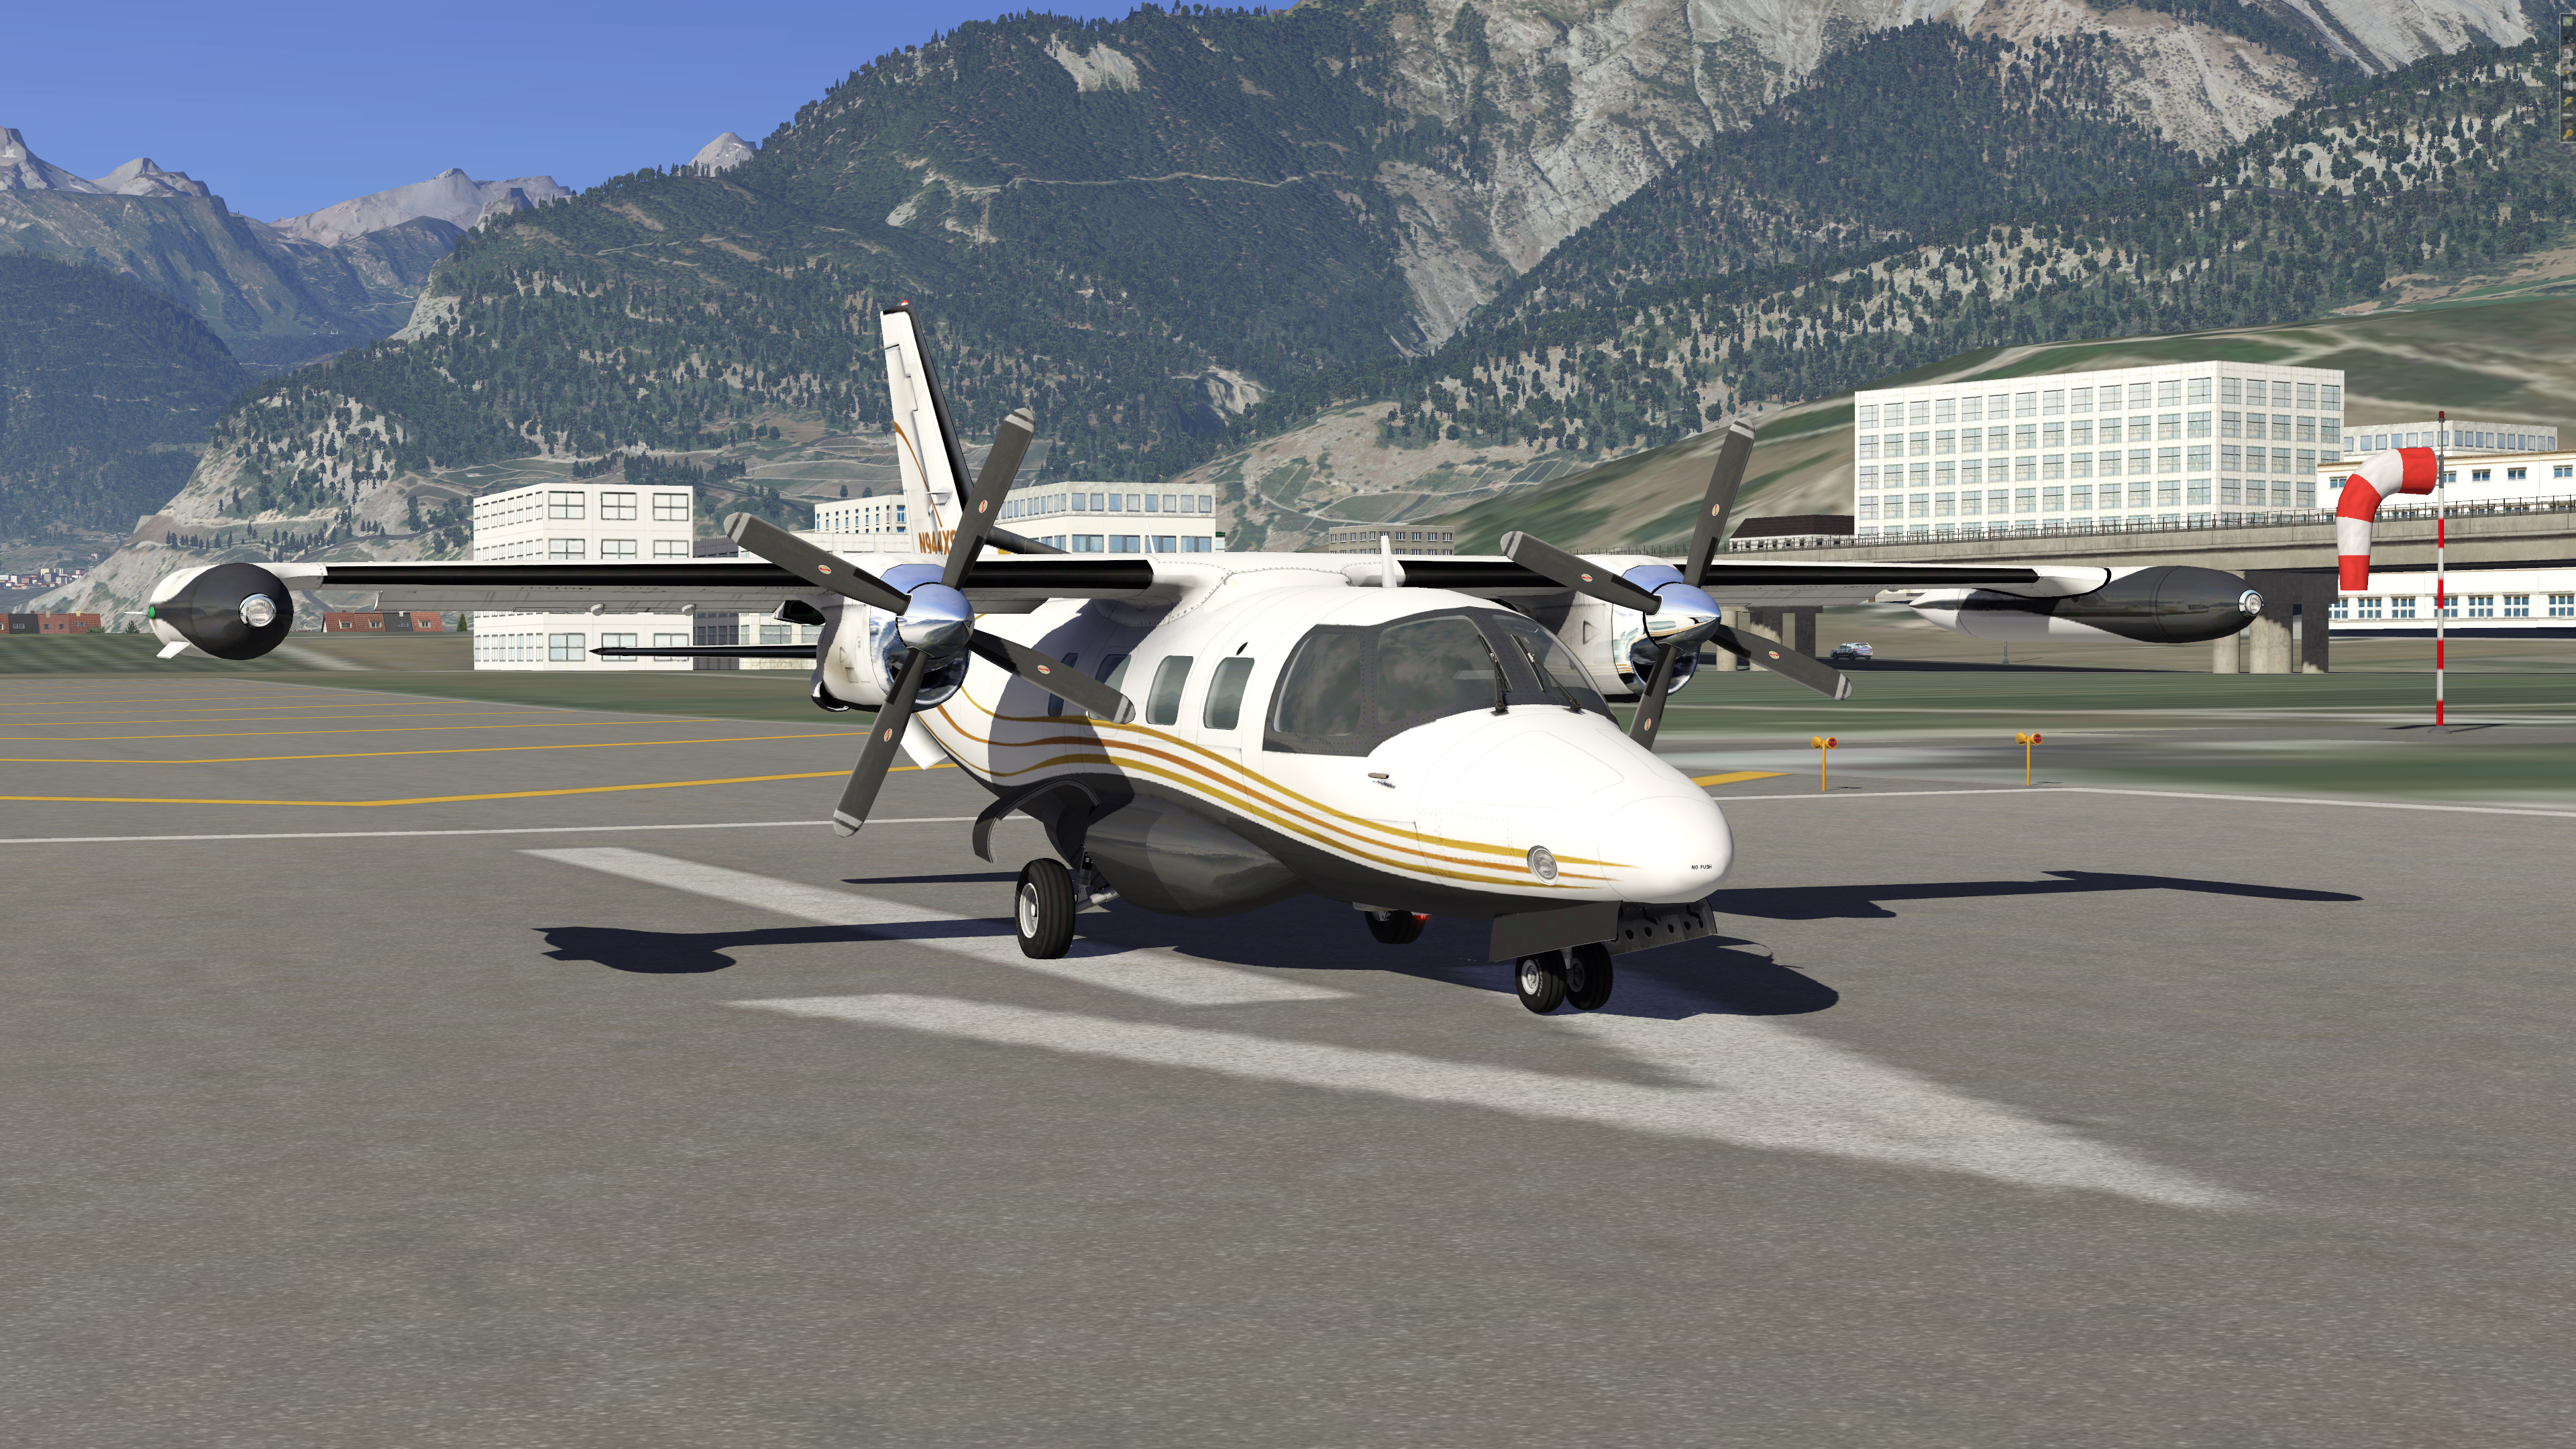 x-plane 11 for mac torrents